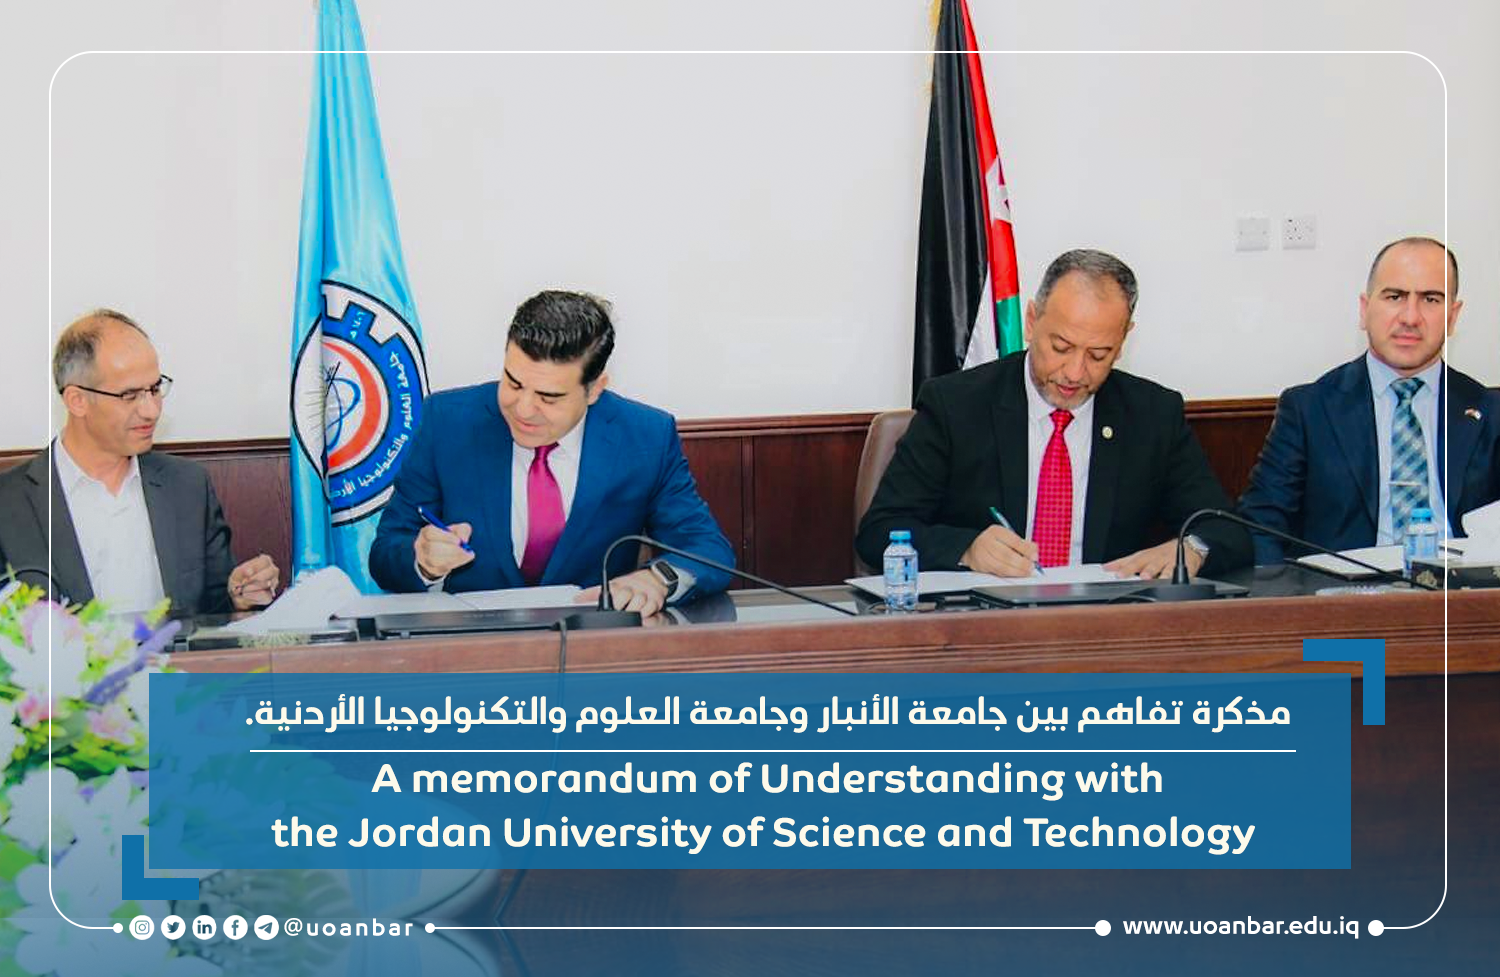 A memorandum of understanding with the Jordan University of Science and Technology